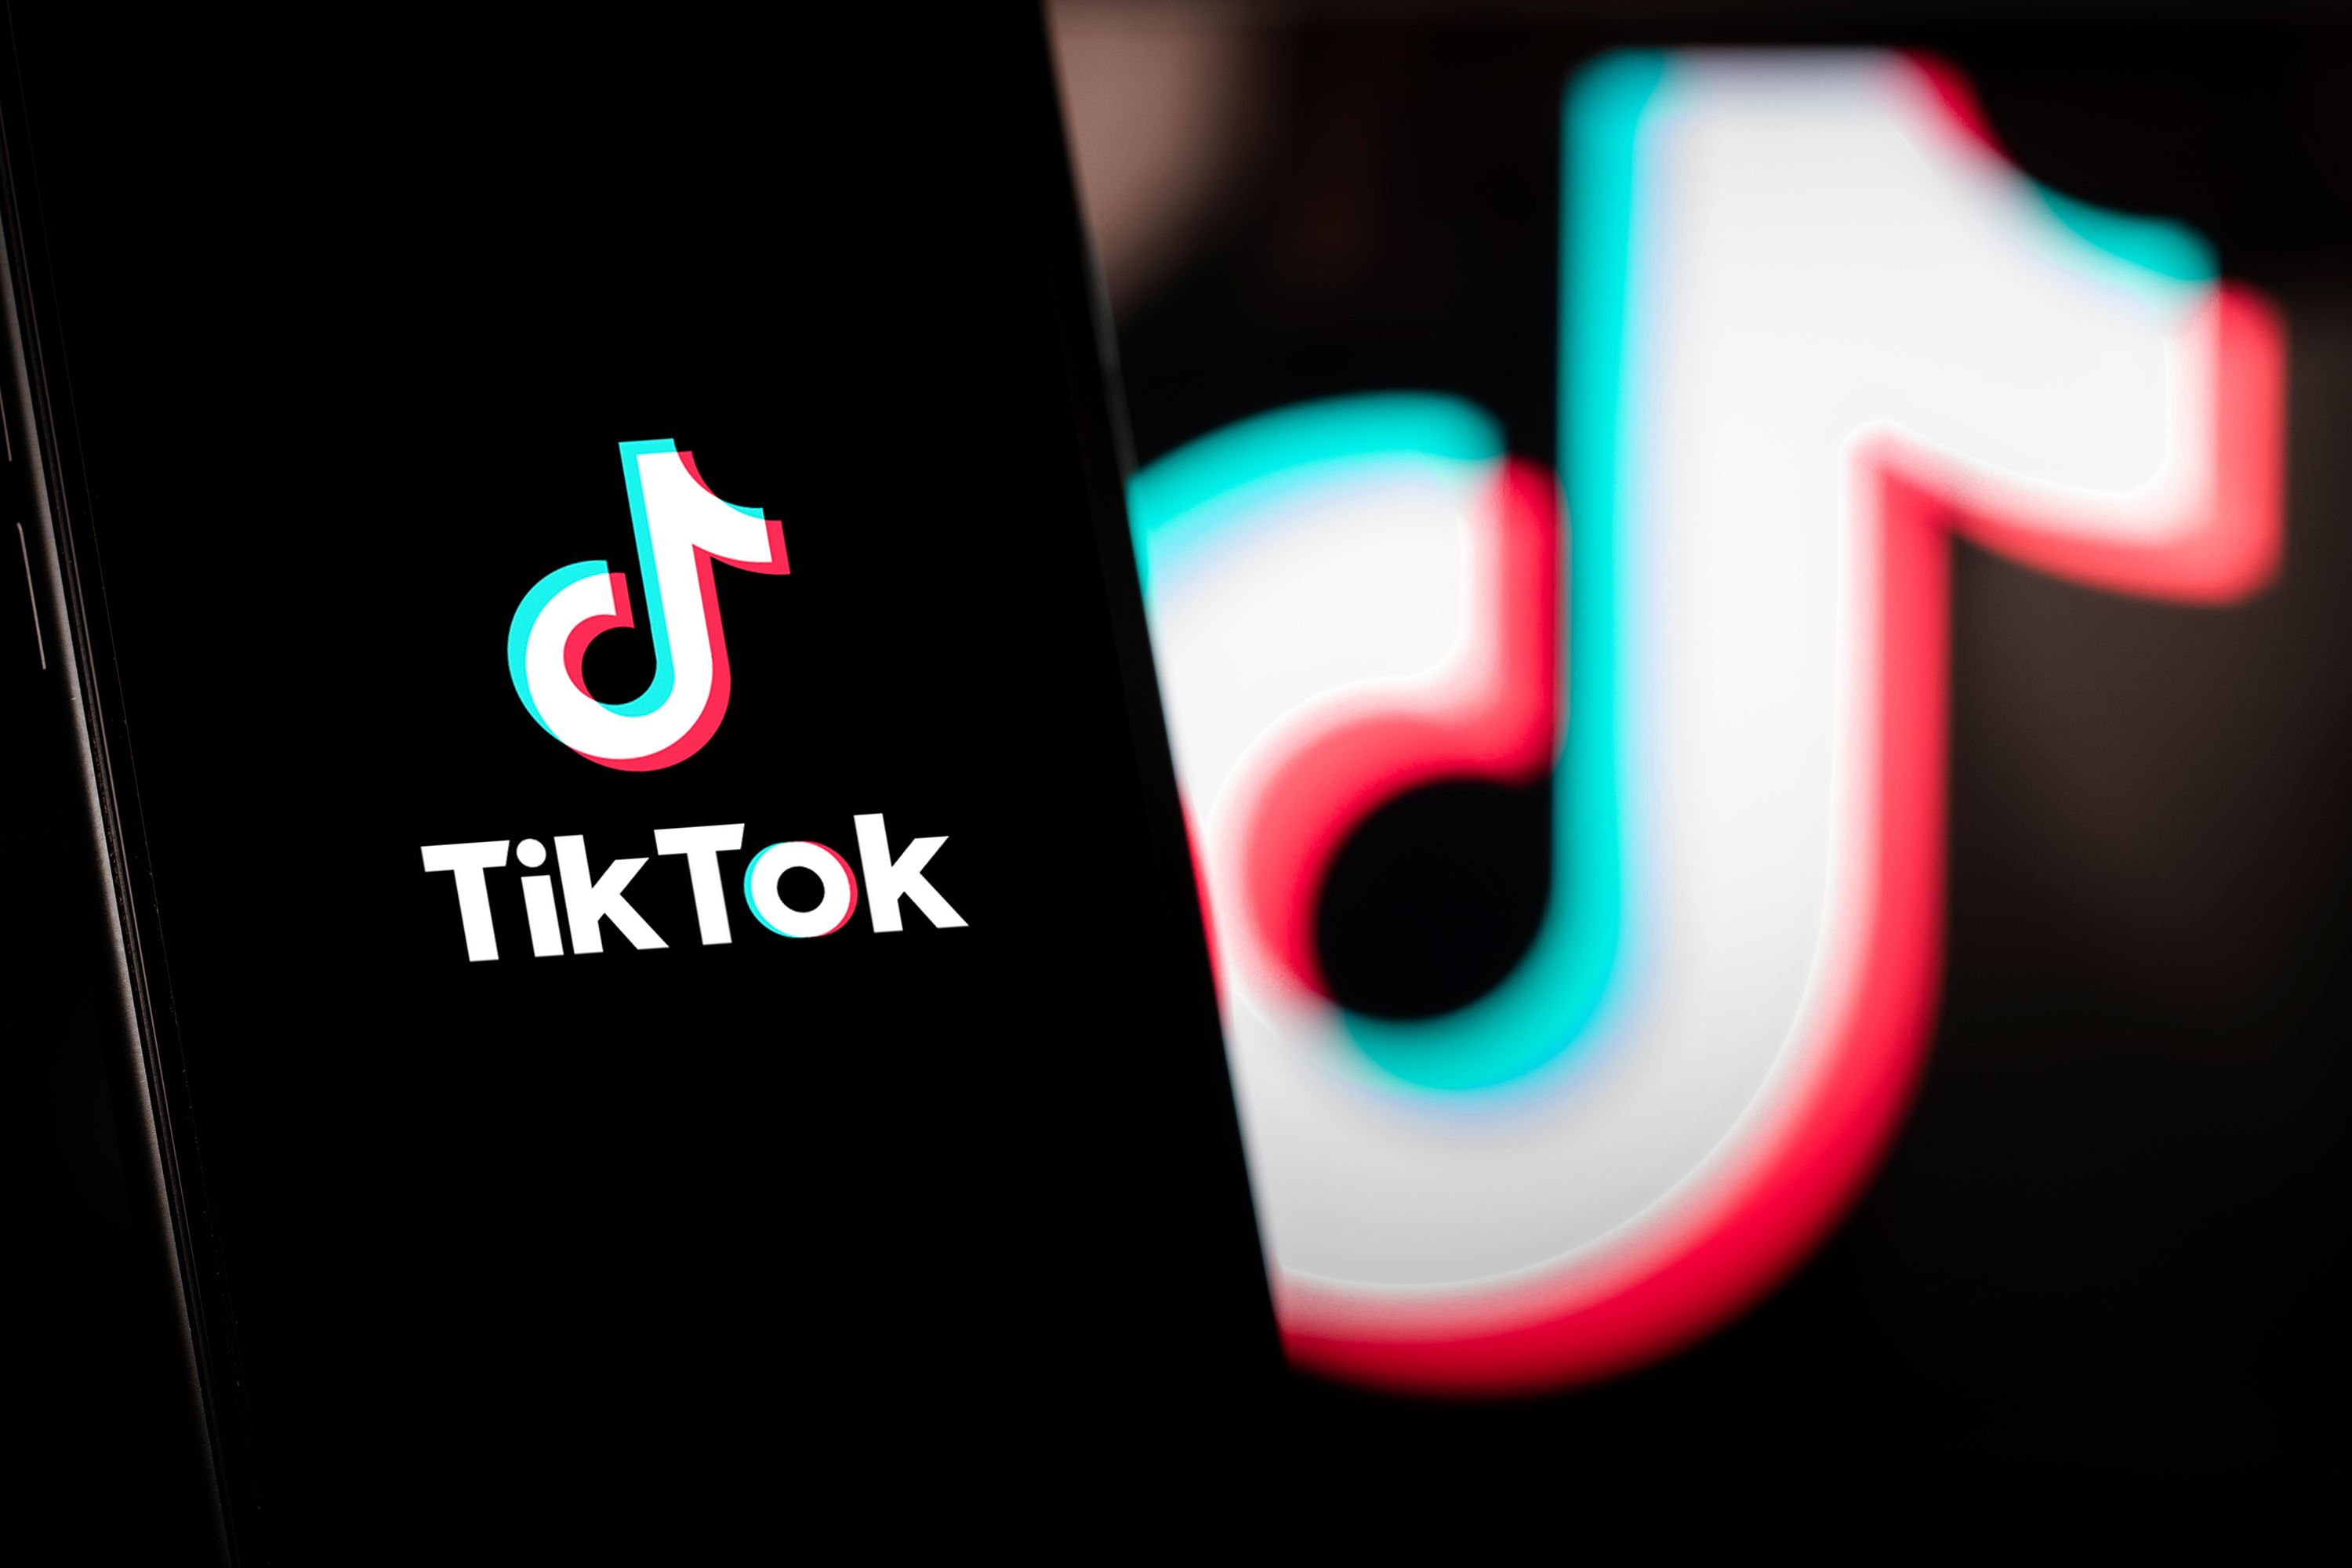 EU bans TikTok from official devices across all three government